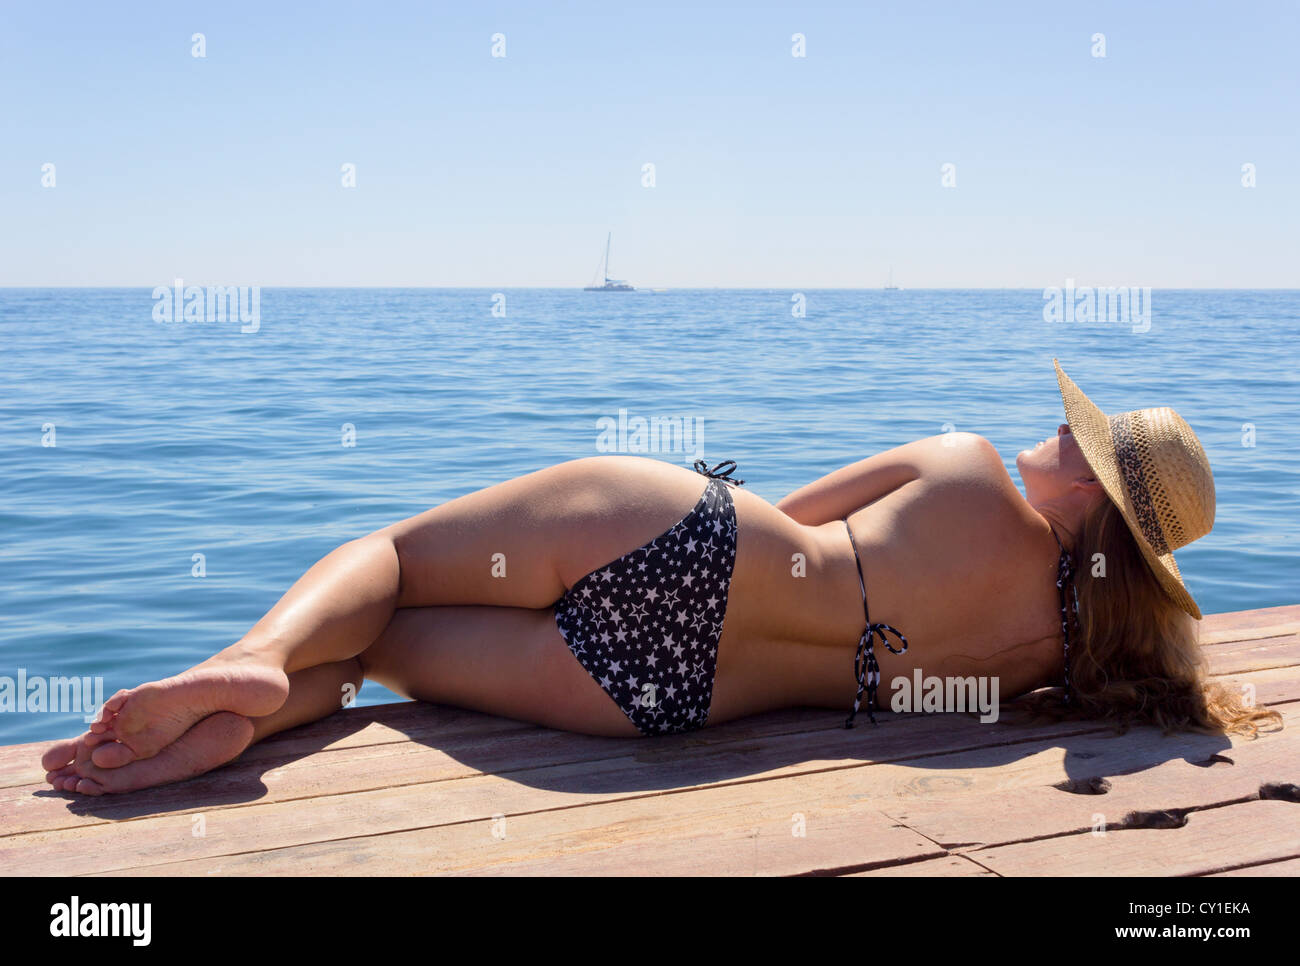 Young woman in black and white bikini and straw sunhat lying on wooden boardwalk. Stock Photo